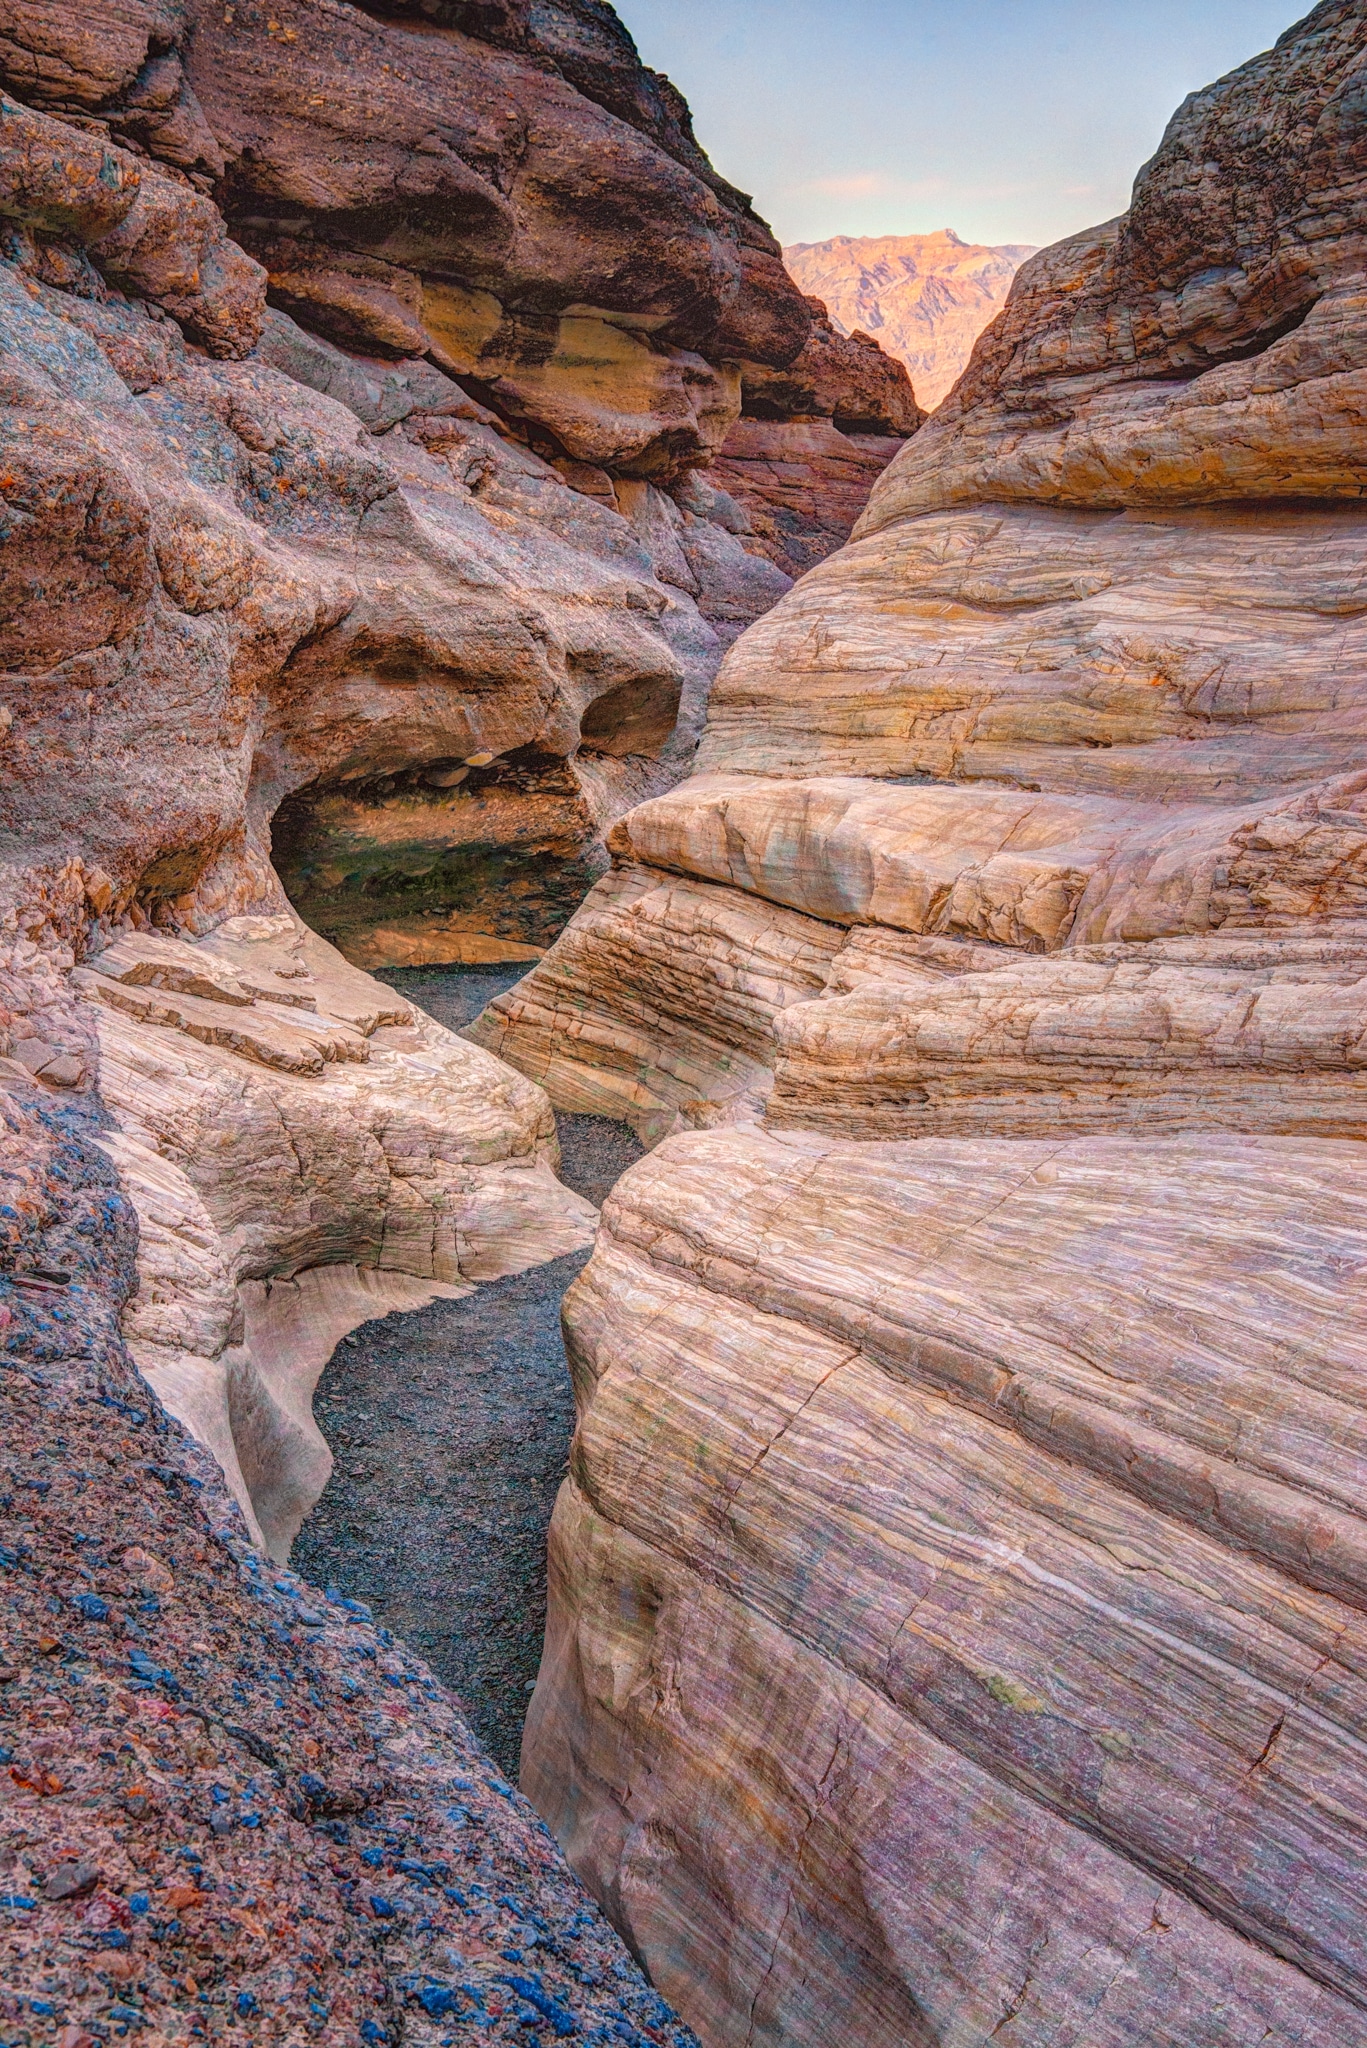 Looking up this wineglass-type canyon, you can see how water has carved a sinuous path through the Noonday dolomite of Mosaic Canyon, located a short distance up a dirt road just west of Stovepipe Wells in Death Valley National Park, California.